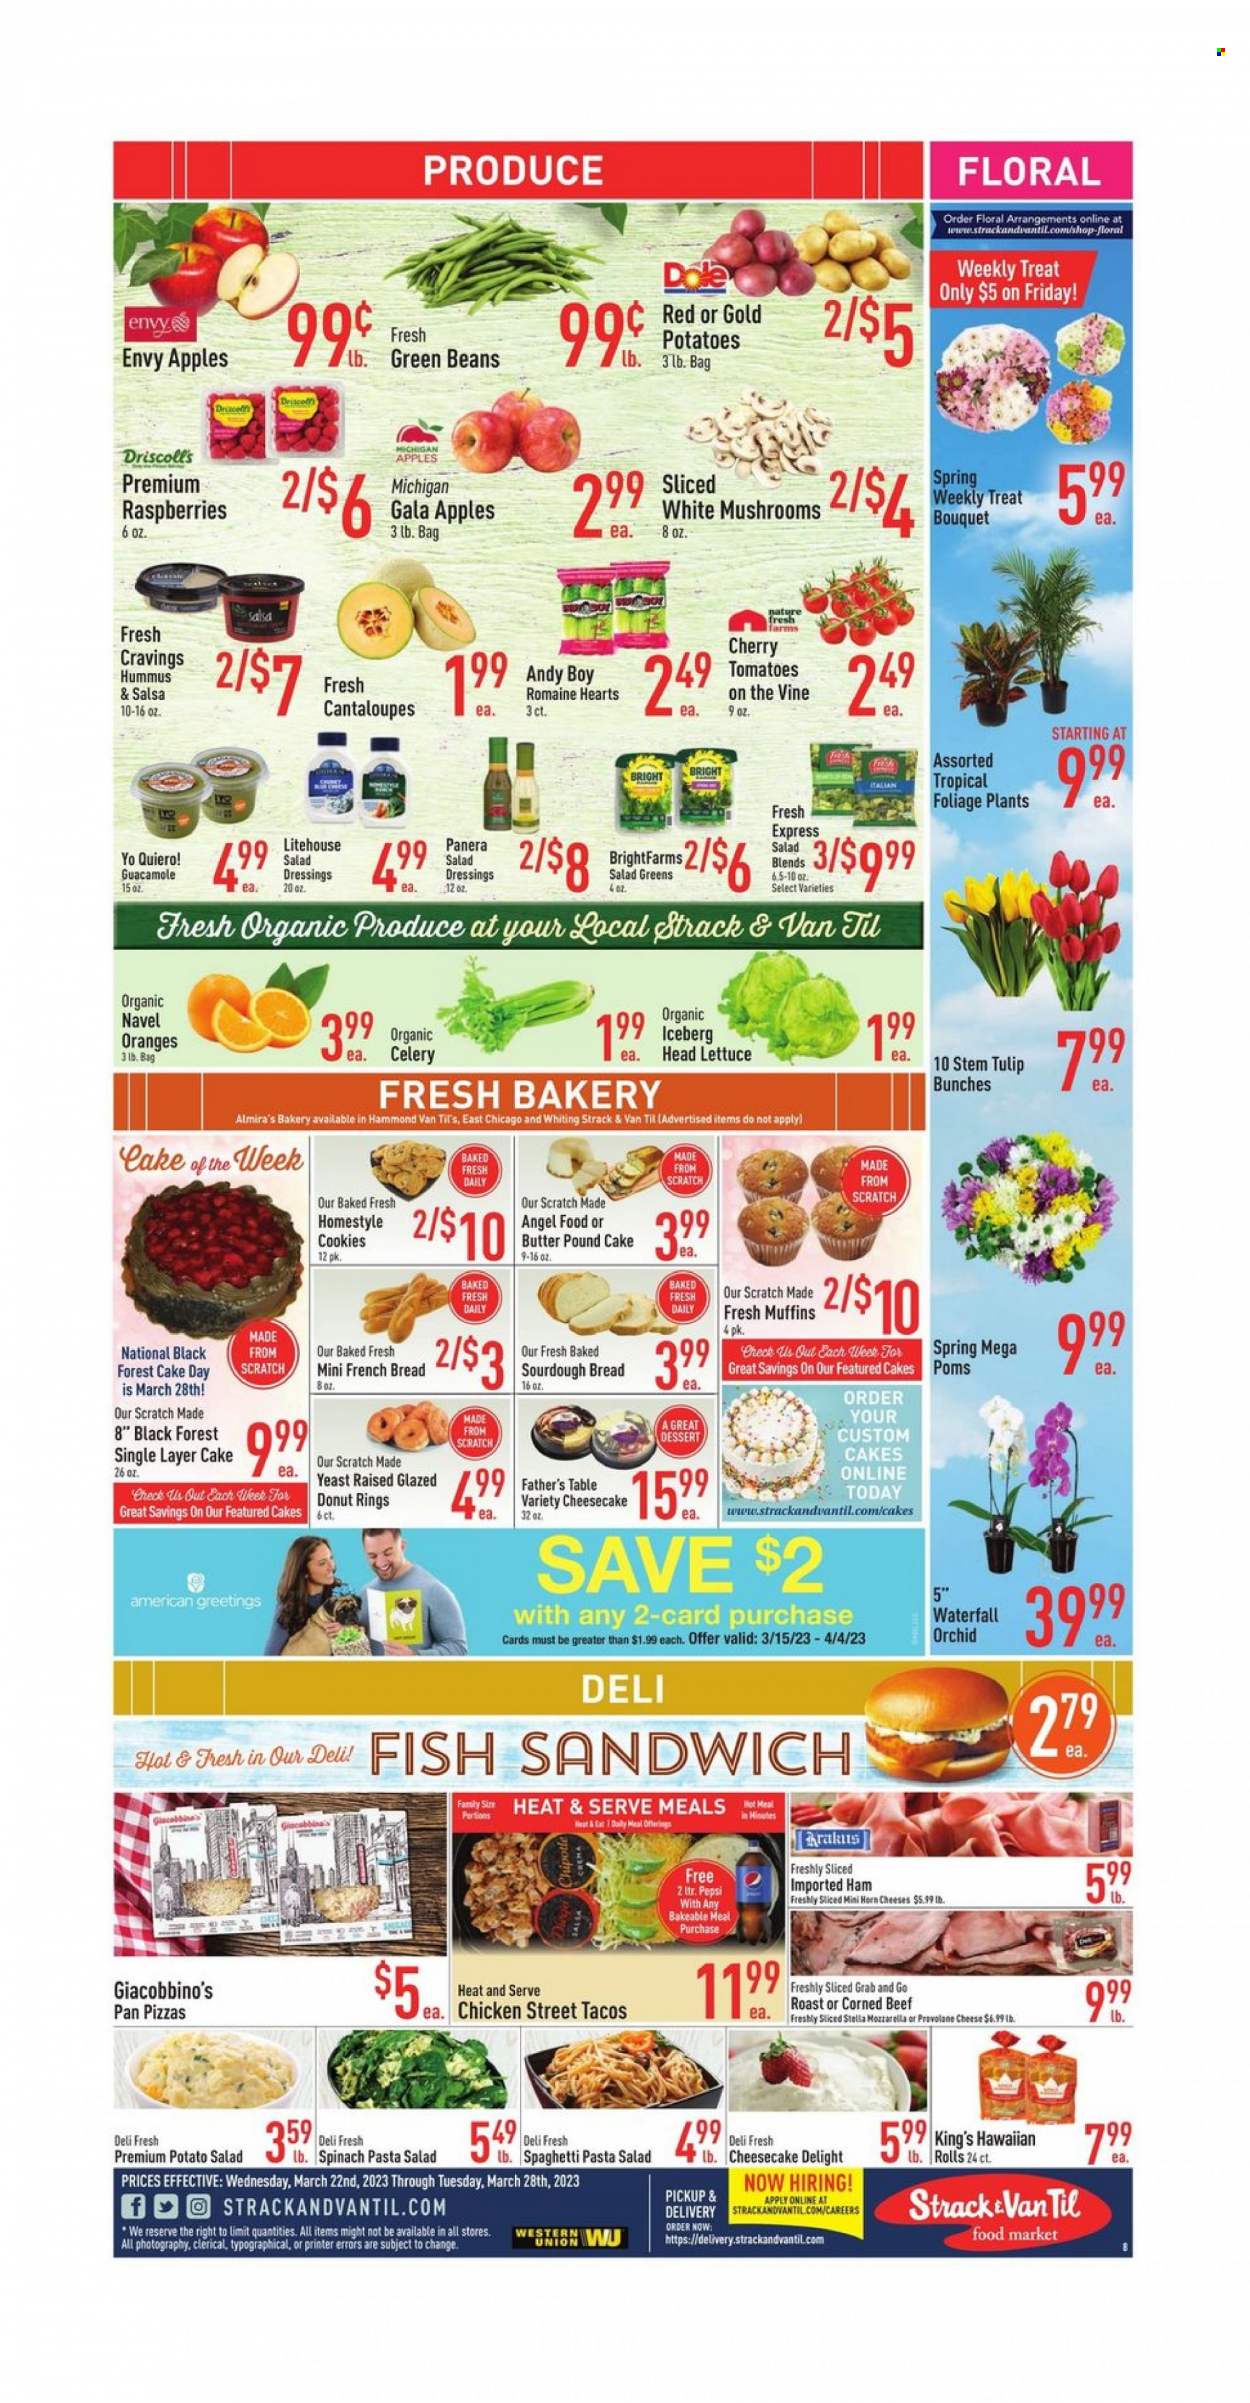 thumbnail - Strack & Van Til Flyer - 03/22/2023 - 03/28/2023 - Sales products - mushrooms, bread, sourdough bread, Father's Table, french bread, cheesecake, donut, Angel Food, muffin, pound cake, beans, cantaloupe, celery, green beans, tomatoes, potatoes, lettuce, Dole, apples, Gala, cherries, oranges, fish, whiting, spaghetti, pizza, sandwich, pasta, fish sandwich, roast, ham, hummus, guacamole, potato salad, pasta salad, corned beef, mozzarella, cheese, Provolone, yeast, Nature Fresh, cookies, salad dressing, salsa, Pepsi, chicken, beef meat, salad greens, navel oranges. Page 8.